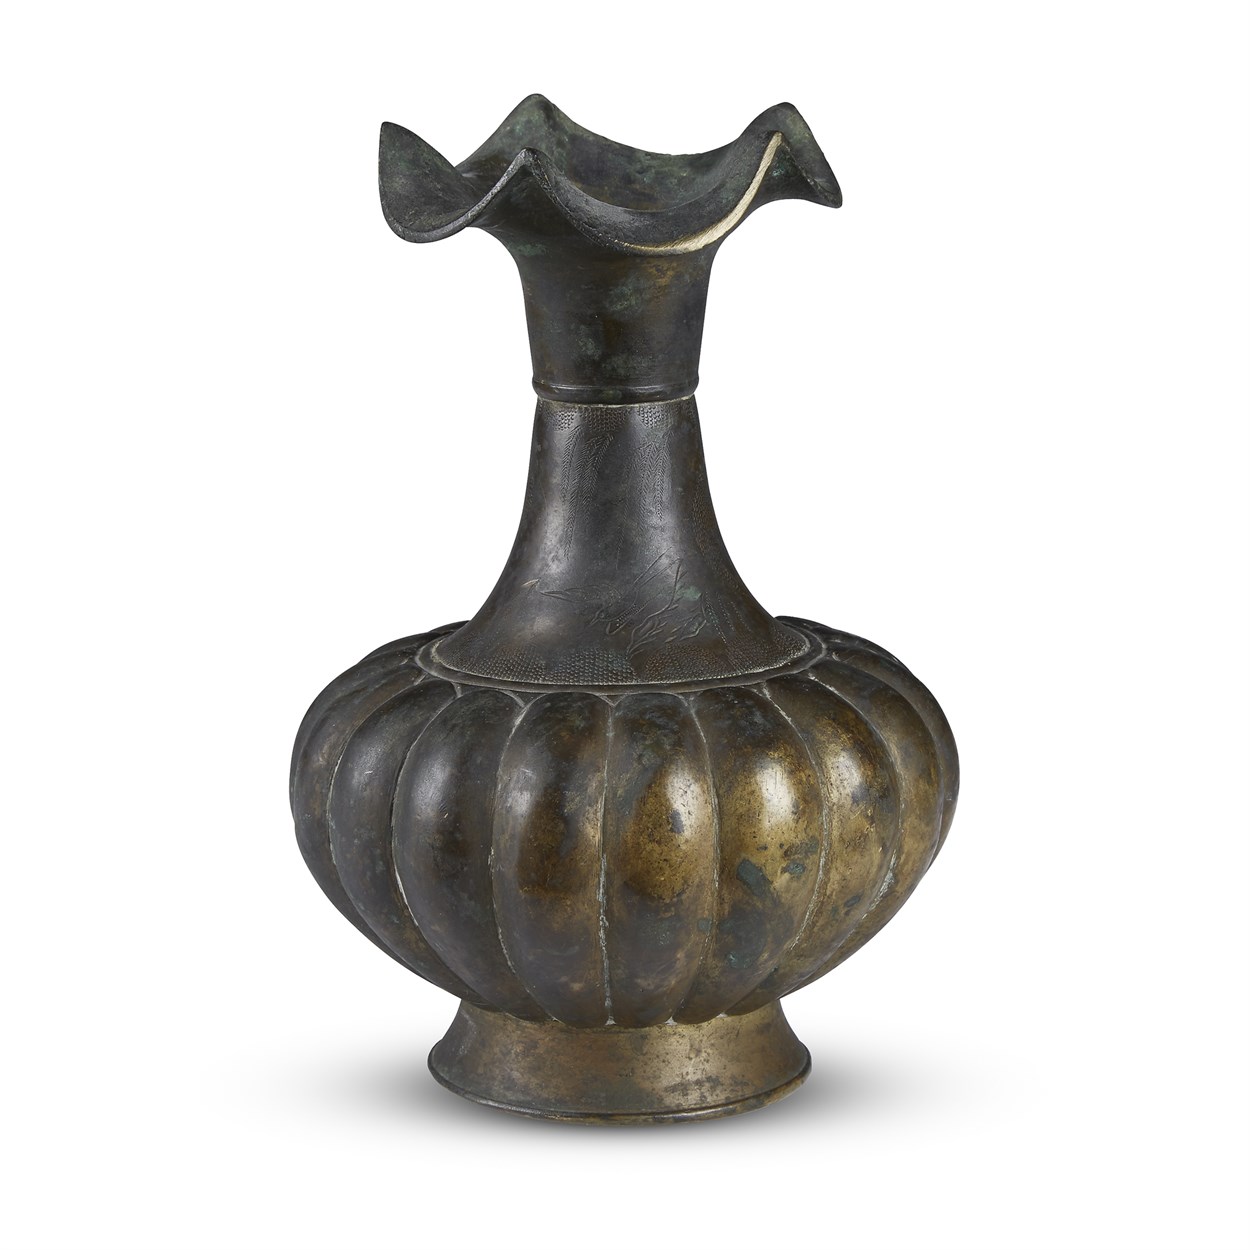 Lot 107 - A patinated and incised bronze lobed vase with crimped and flared lip, possibly Korean